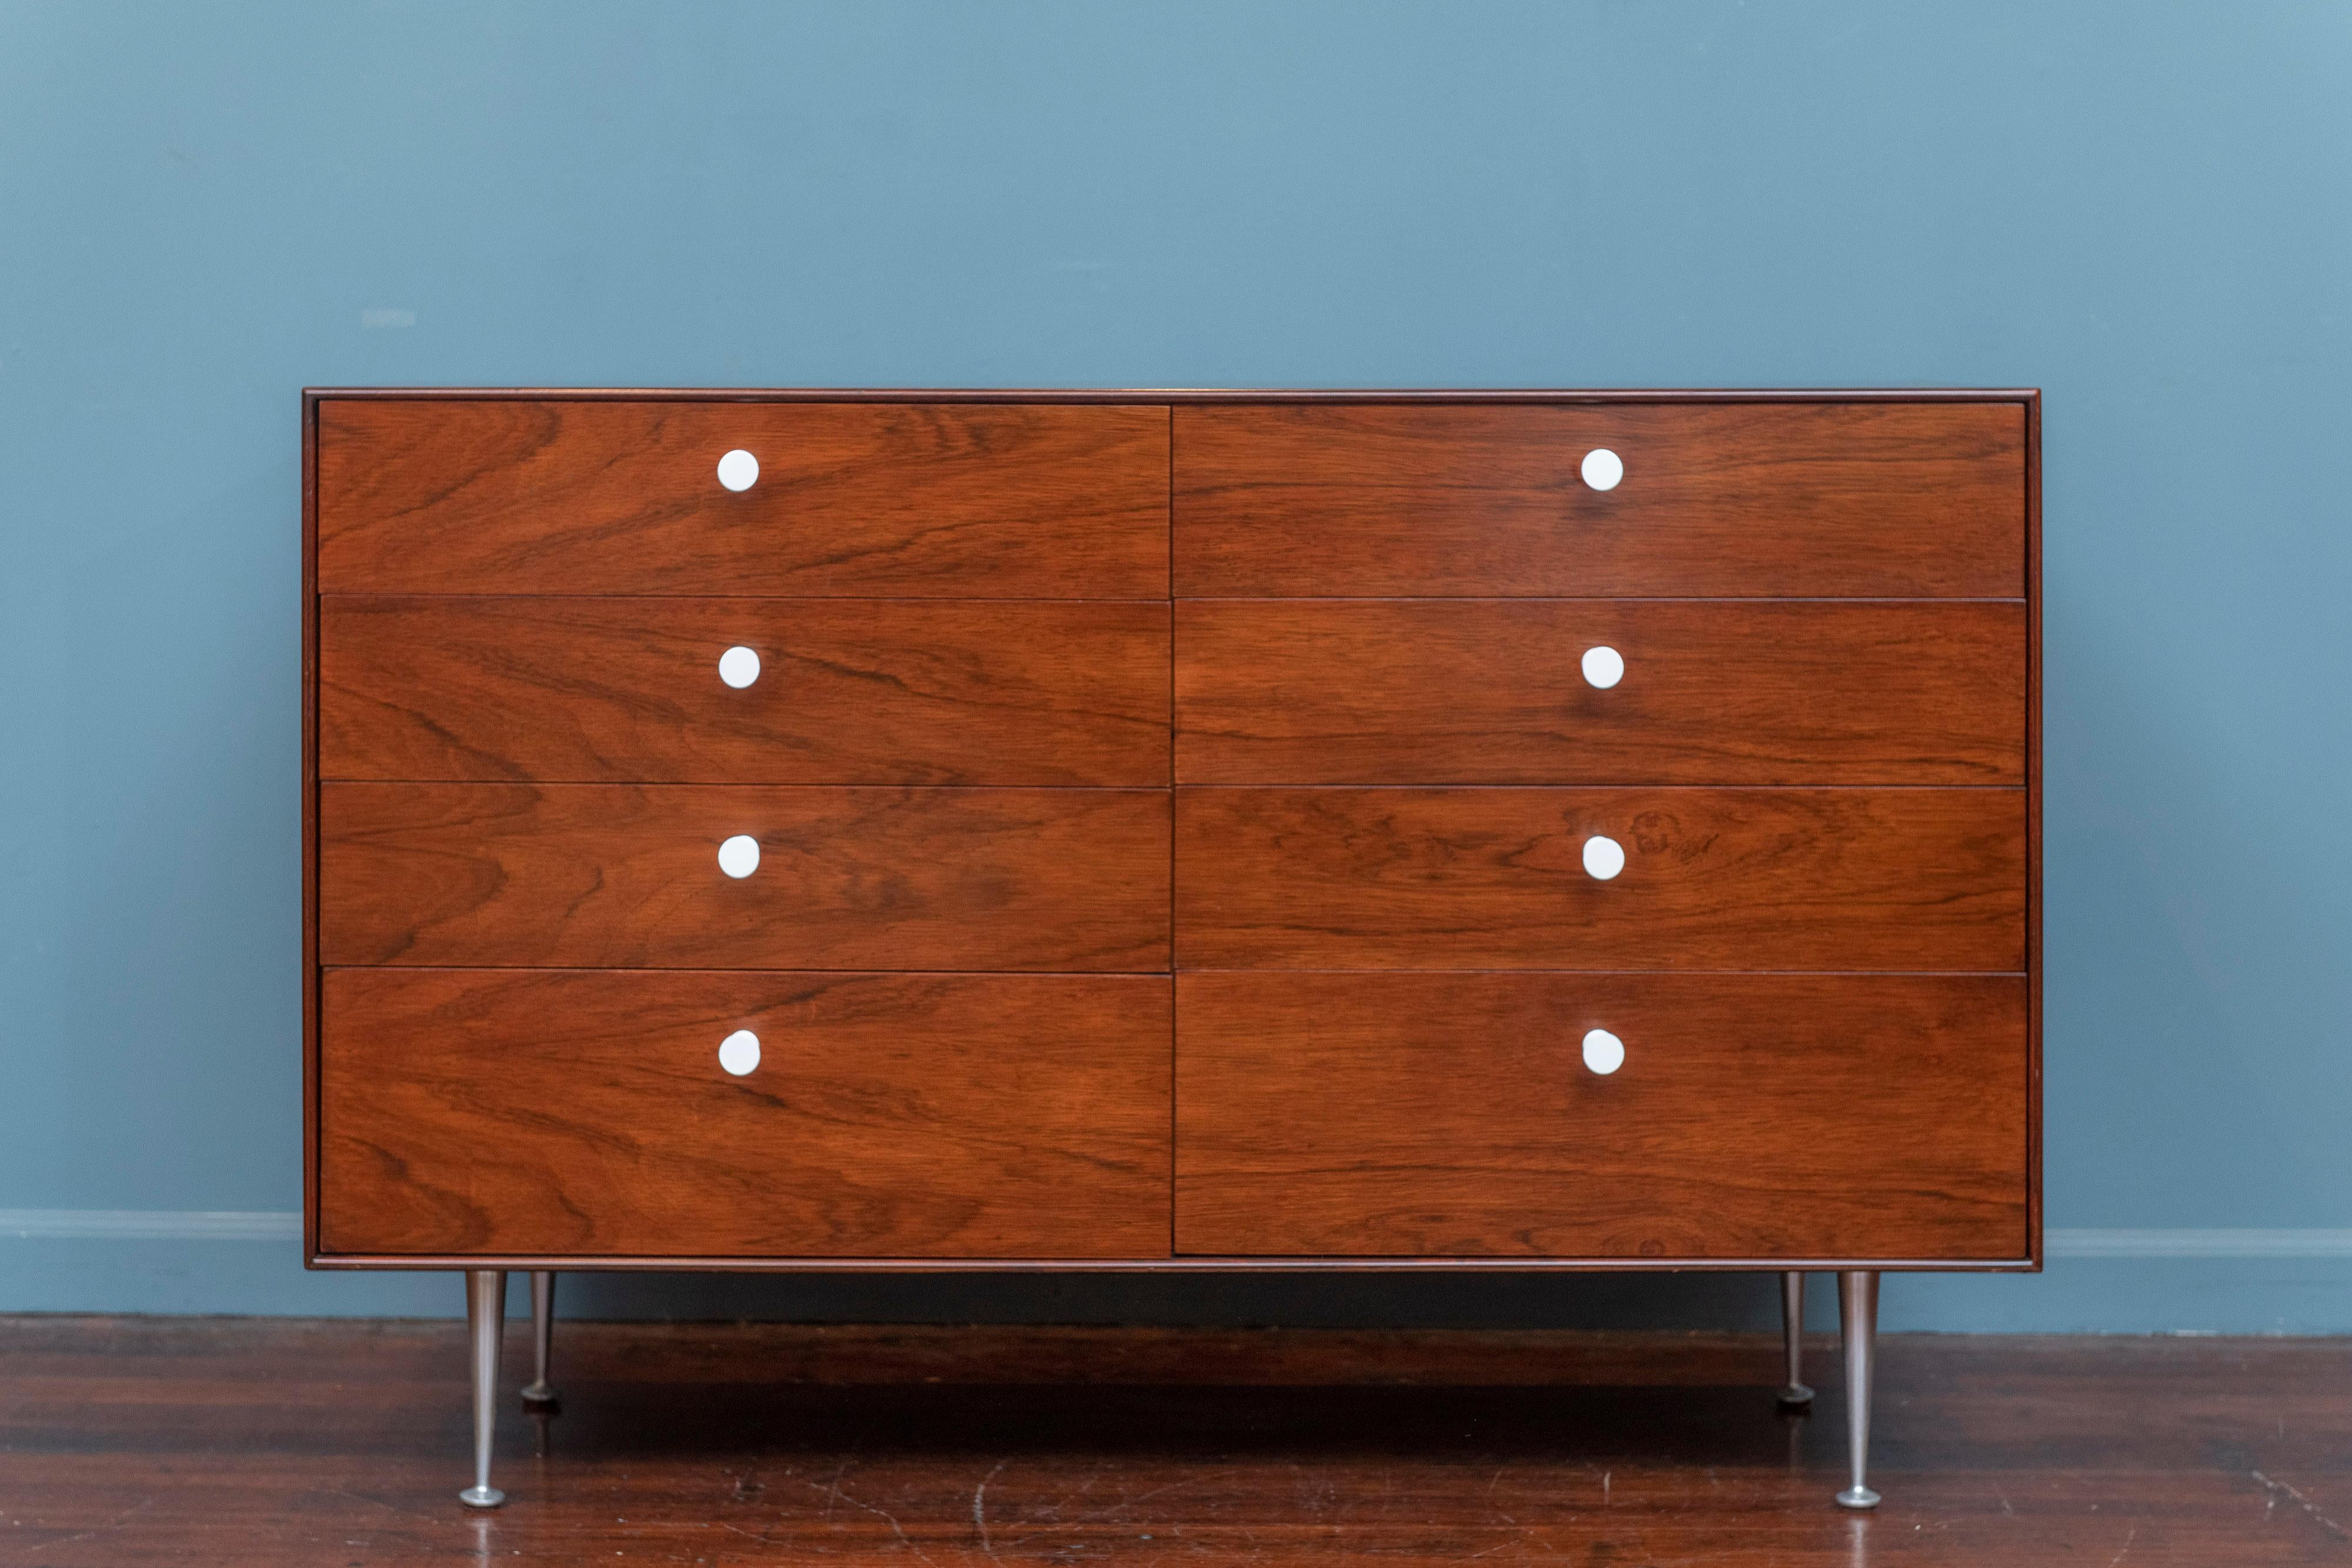 George Nelson Thin Edge Group eight drawer dresser for Herman Miller.
Made with high quality construction and detail in Brazilian rosewood and oak with drawer dividers to help with organization. White conical drawer pulls on original tapering